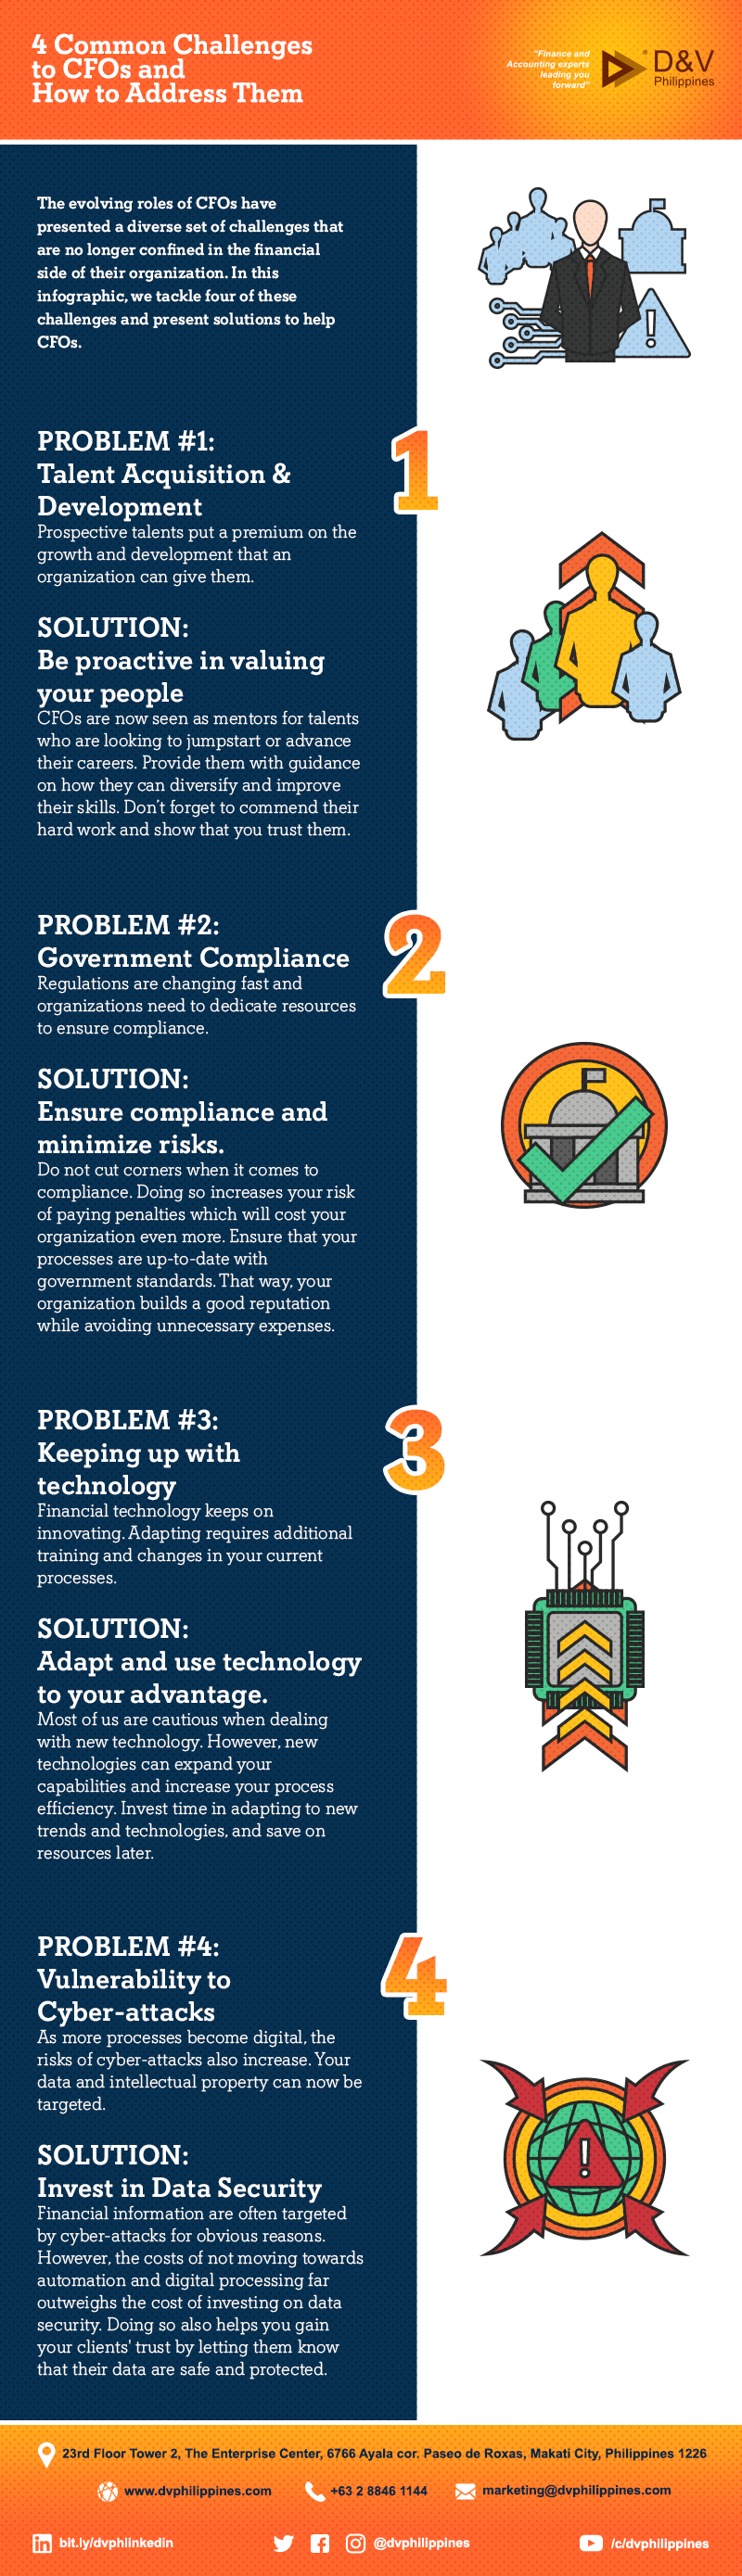 Infograpihcs_4-Common-Challenges-to-CFOs-and-How-to-Address-Them_Main